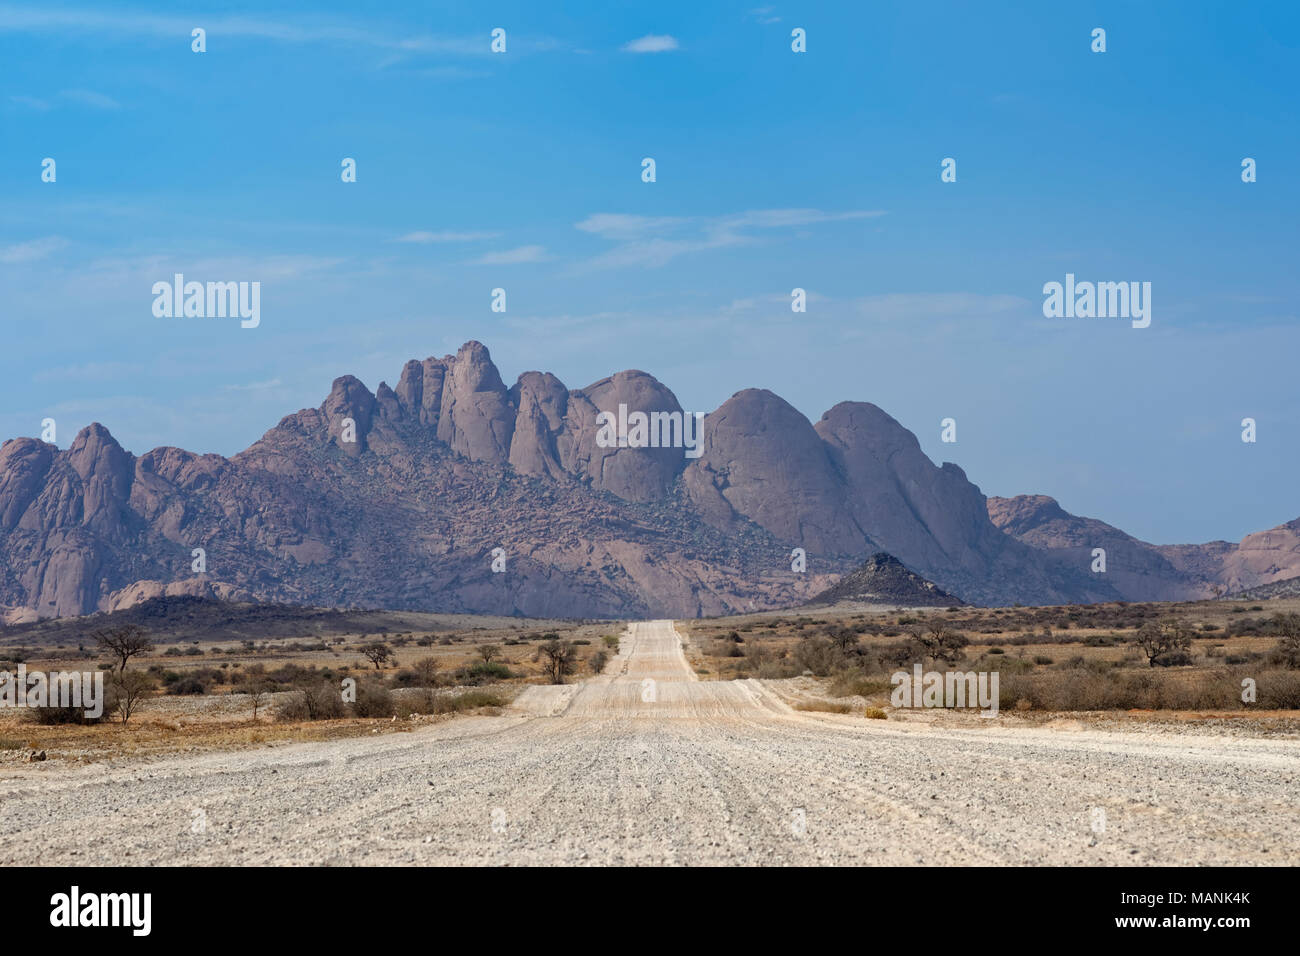 Spitzkoppe, view from the road D3716, Erongo Region, Damaraland, Namibia, Africa Stock Photo